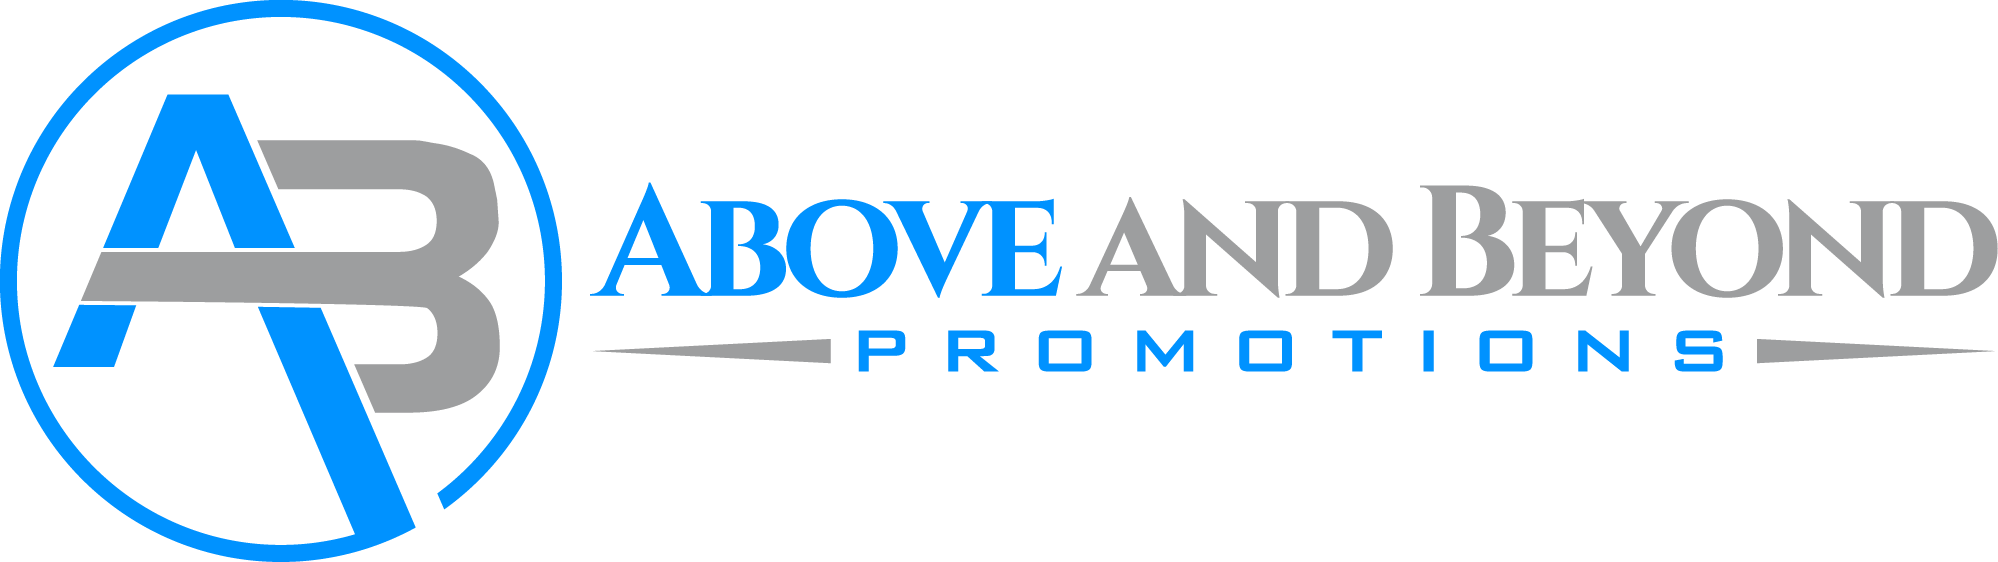 Above and Beyond Promotions's Logo